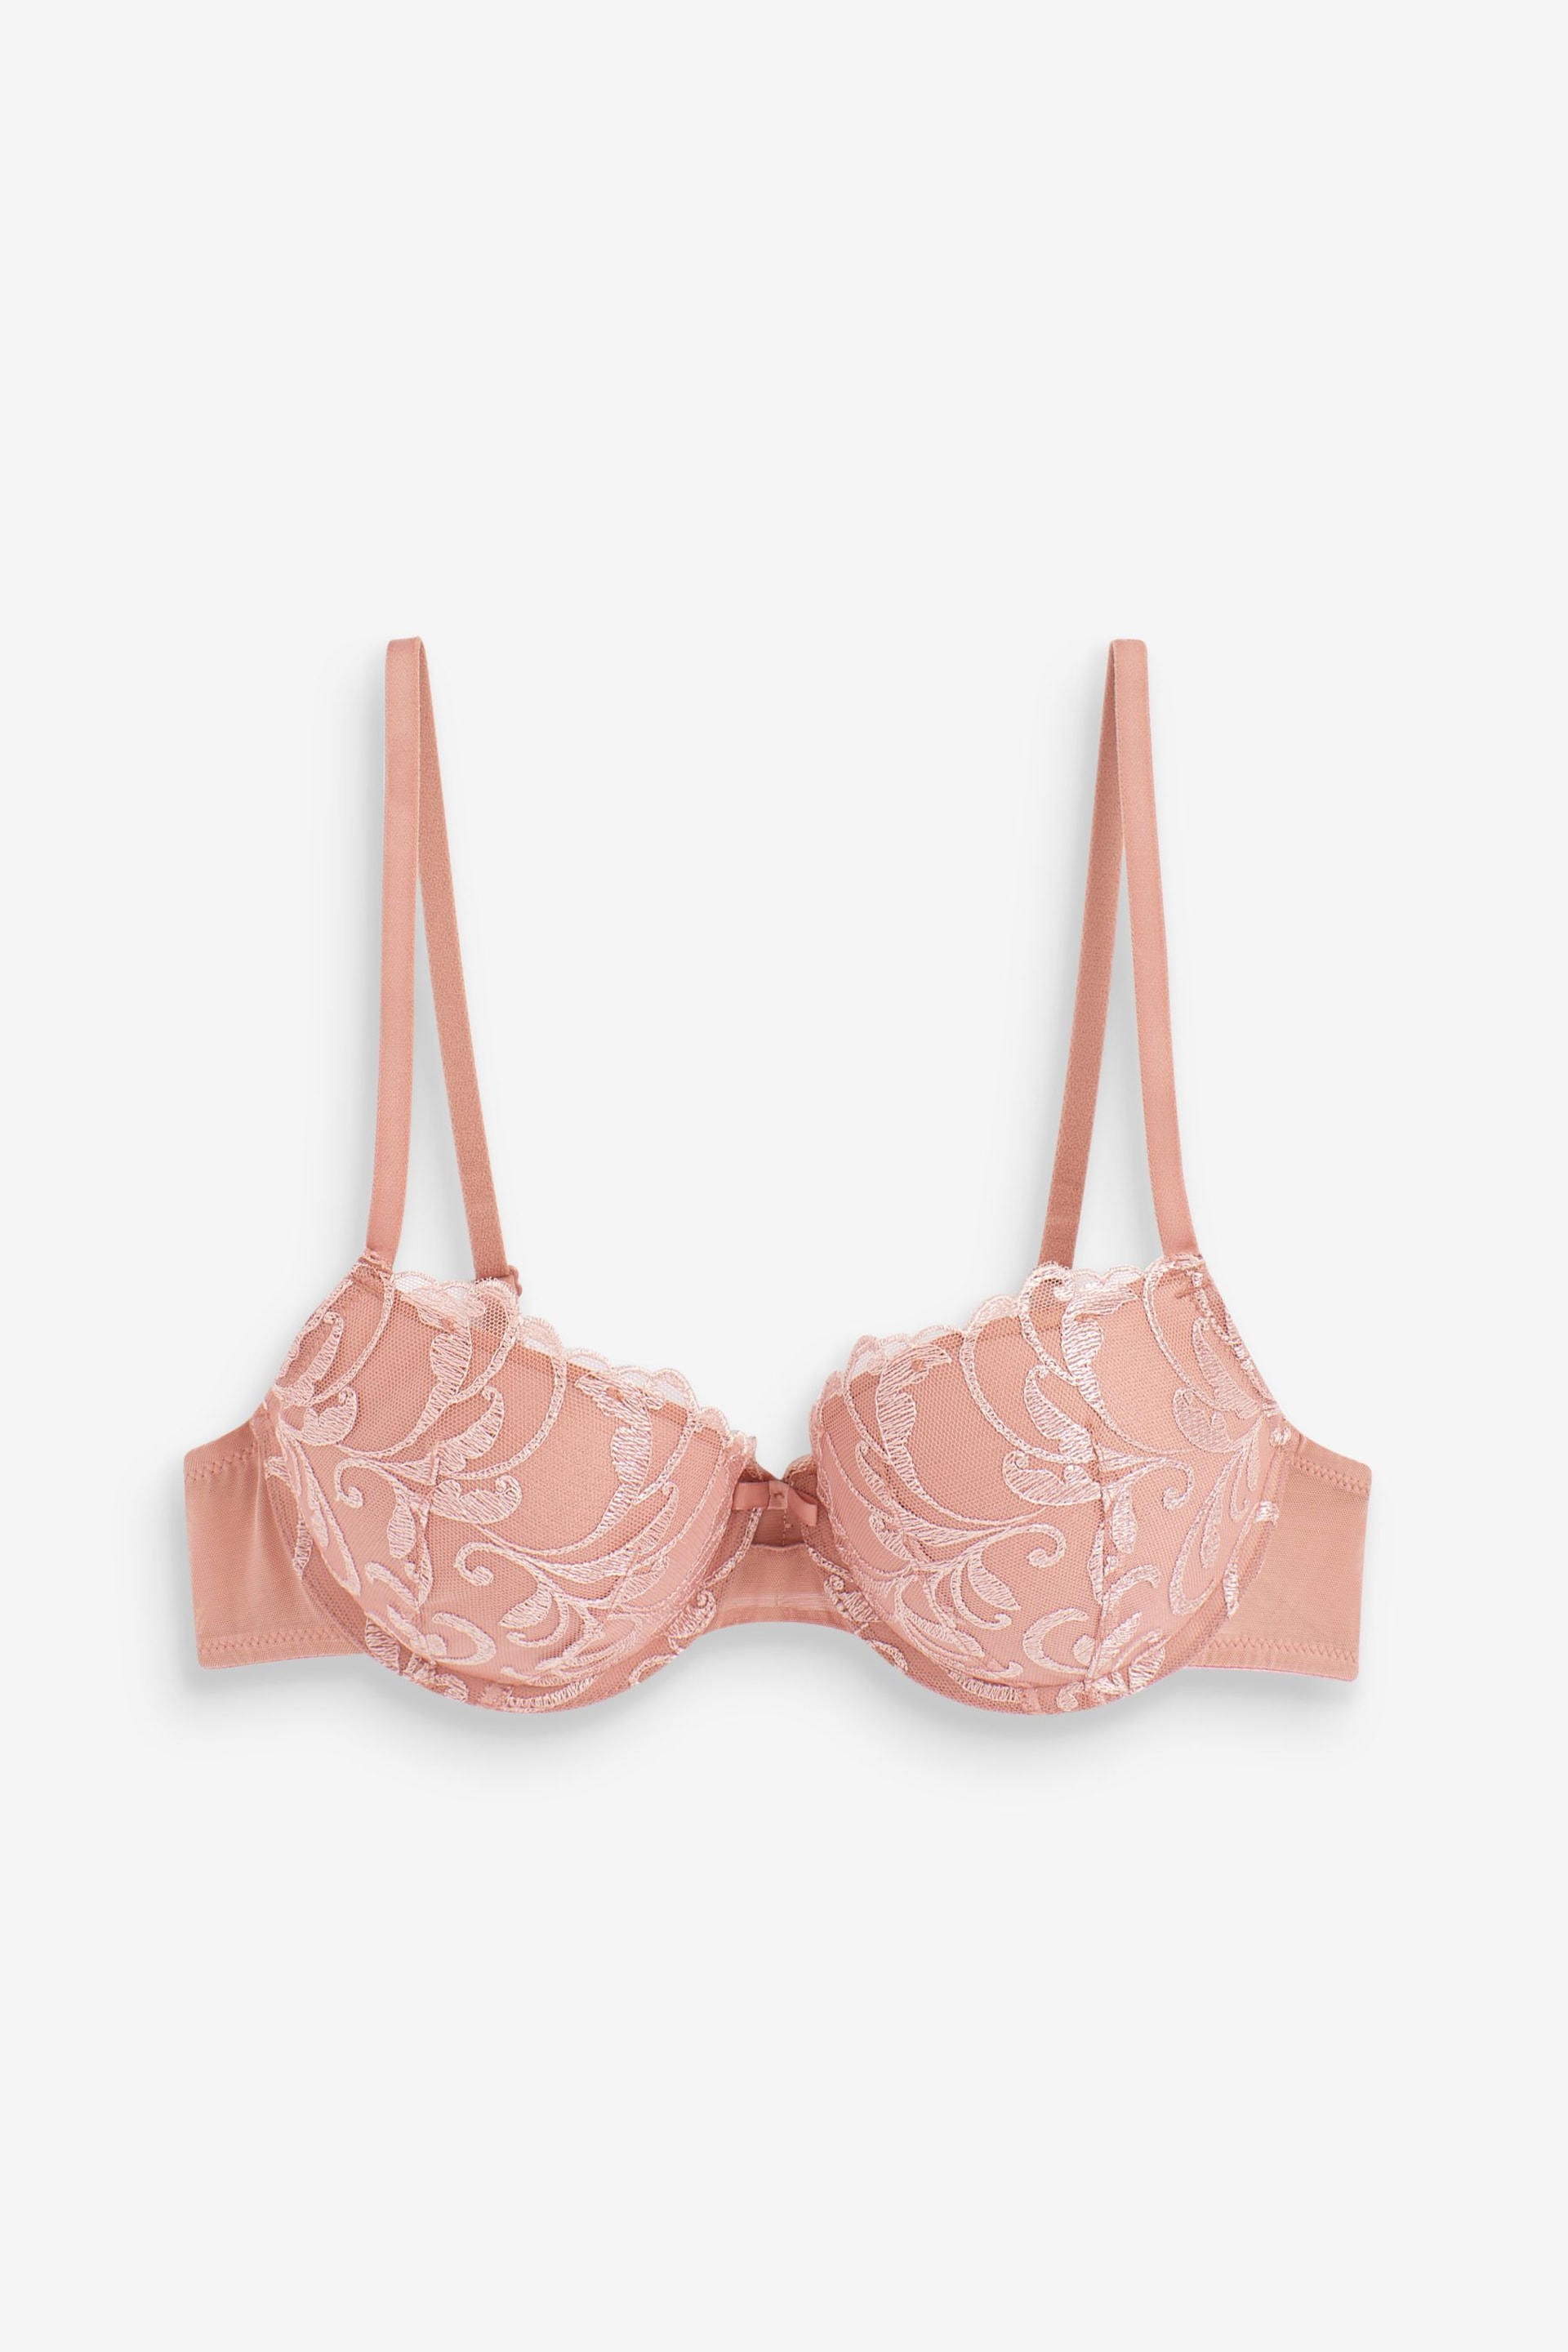 Rose Pink/White Pad Balcony Embroidered Bras 2 Pack - Image 10 of 13